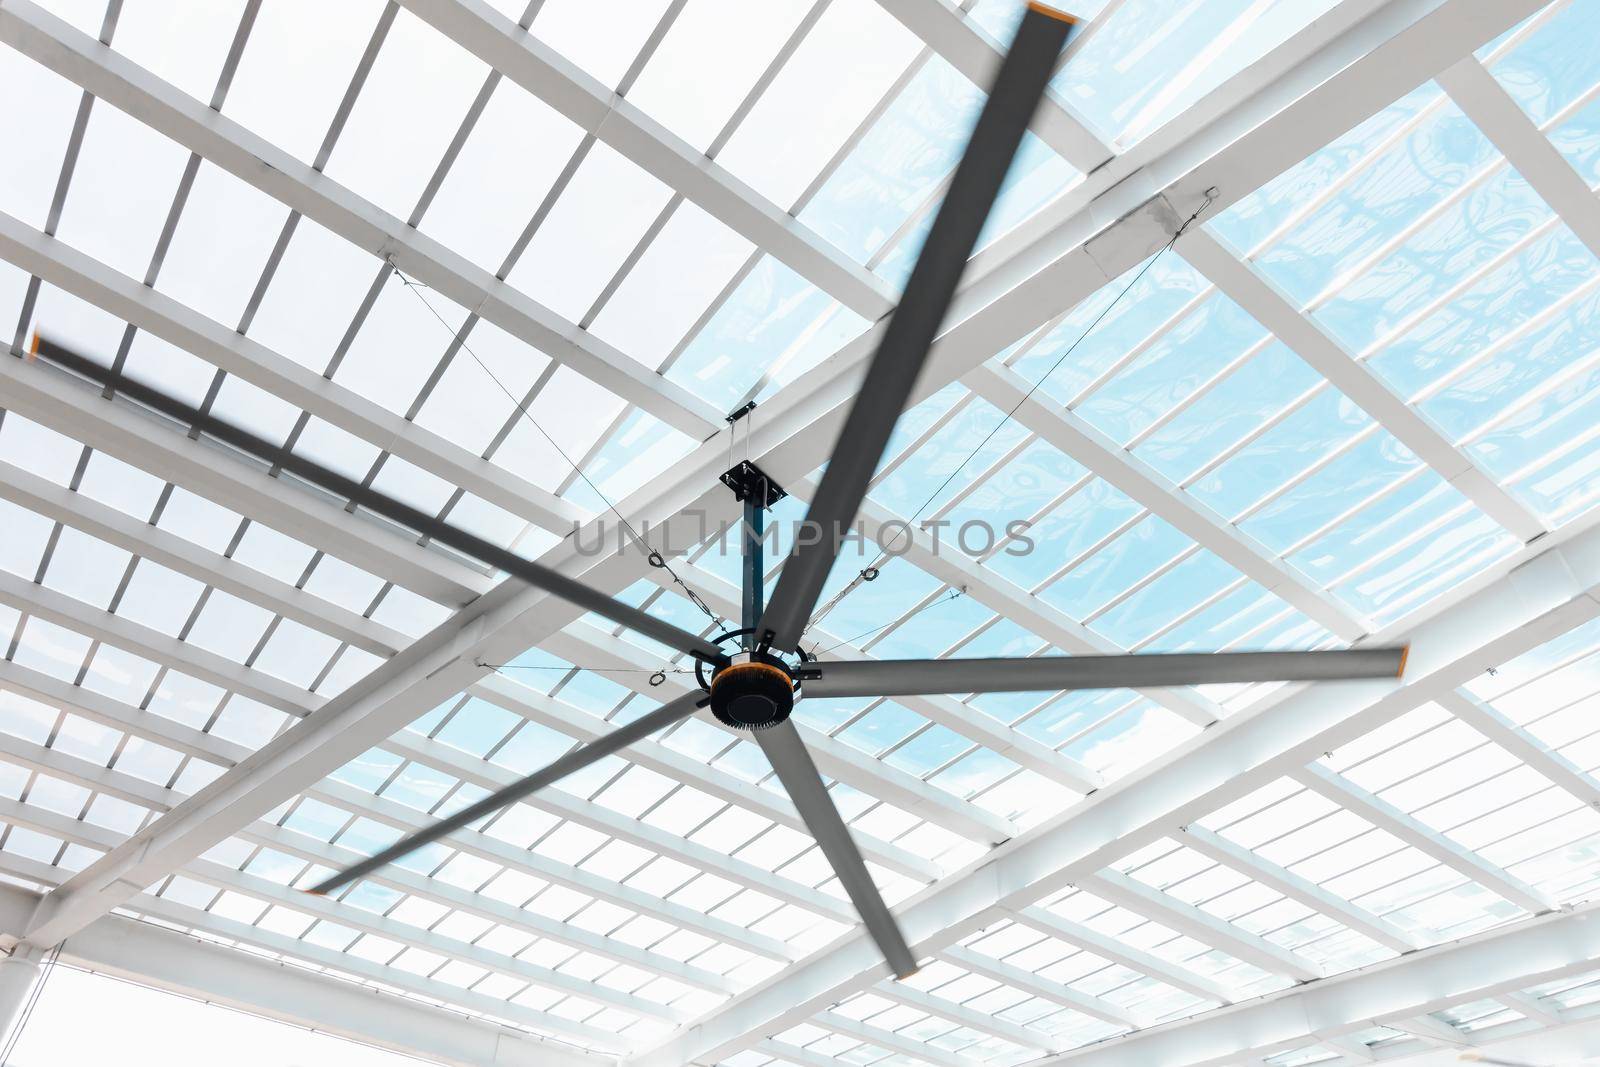 Ventilation Electrical Ceiling Fan Indoor Hall of Building, Luxury Modern Architecture Roofing Transparent Grass and Structure Metal Frame. Electric Ventilator Fan Against Geometric Structures Frame by MahaHeang245789